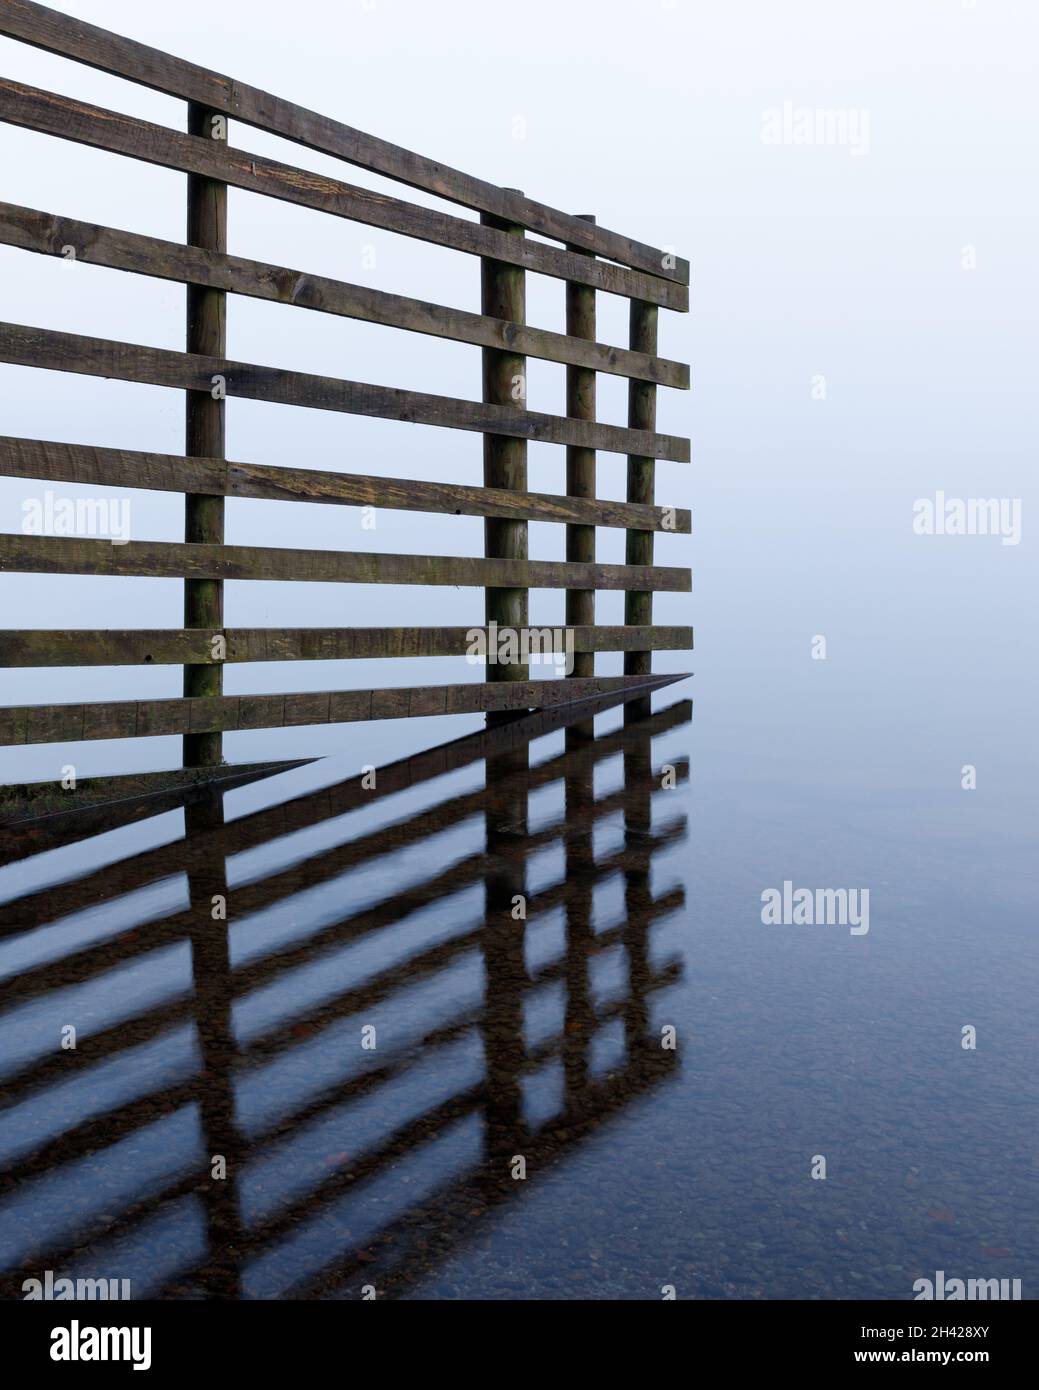 Grasmere, Cumbria, UK, October 1st 2020: On a misty morning a fence made from slats of wood enters the water of Grasmere in the Lake District. Stock Photo